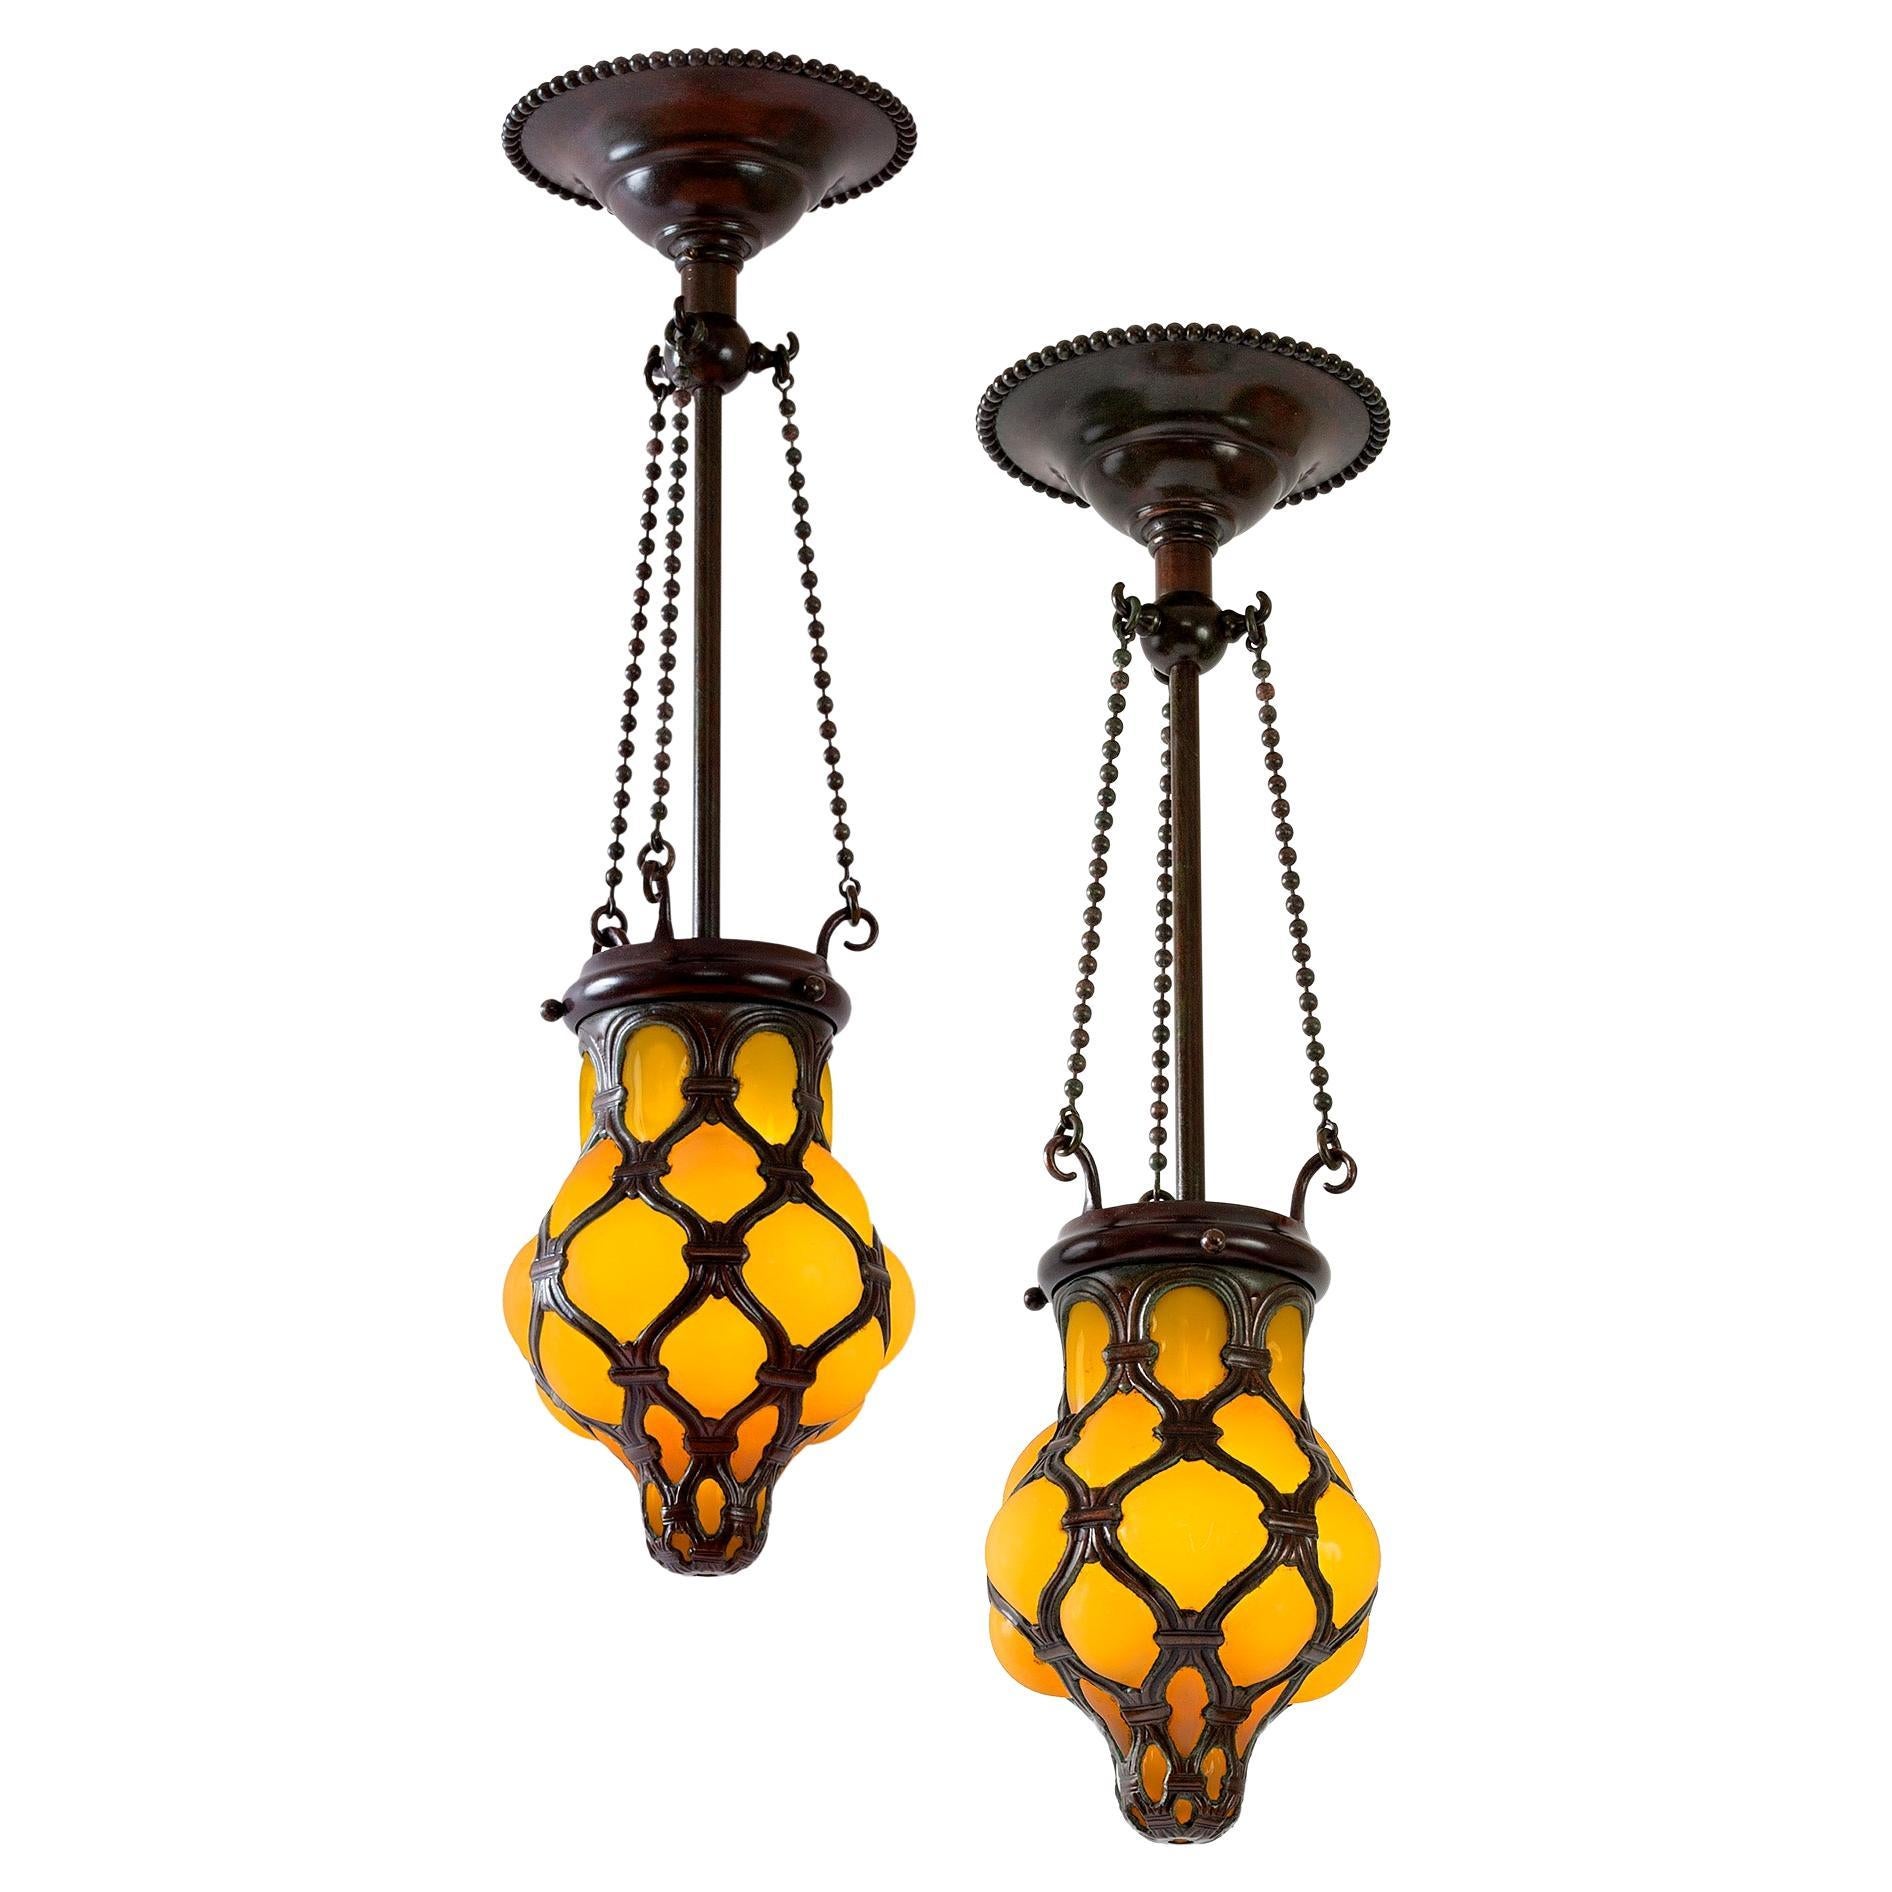 Pair of Tiffany Studios New York "Globe" Glass and Bronze Chandeliers For Sale